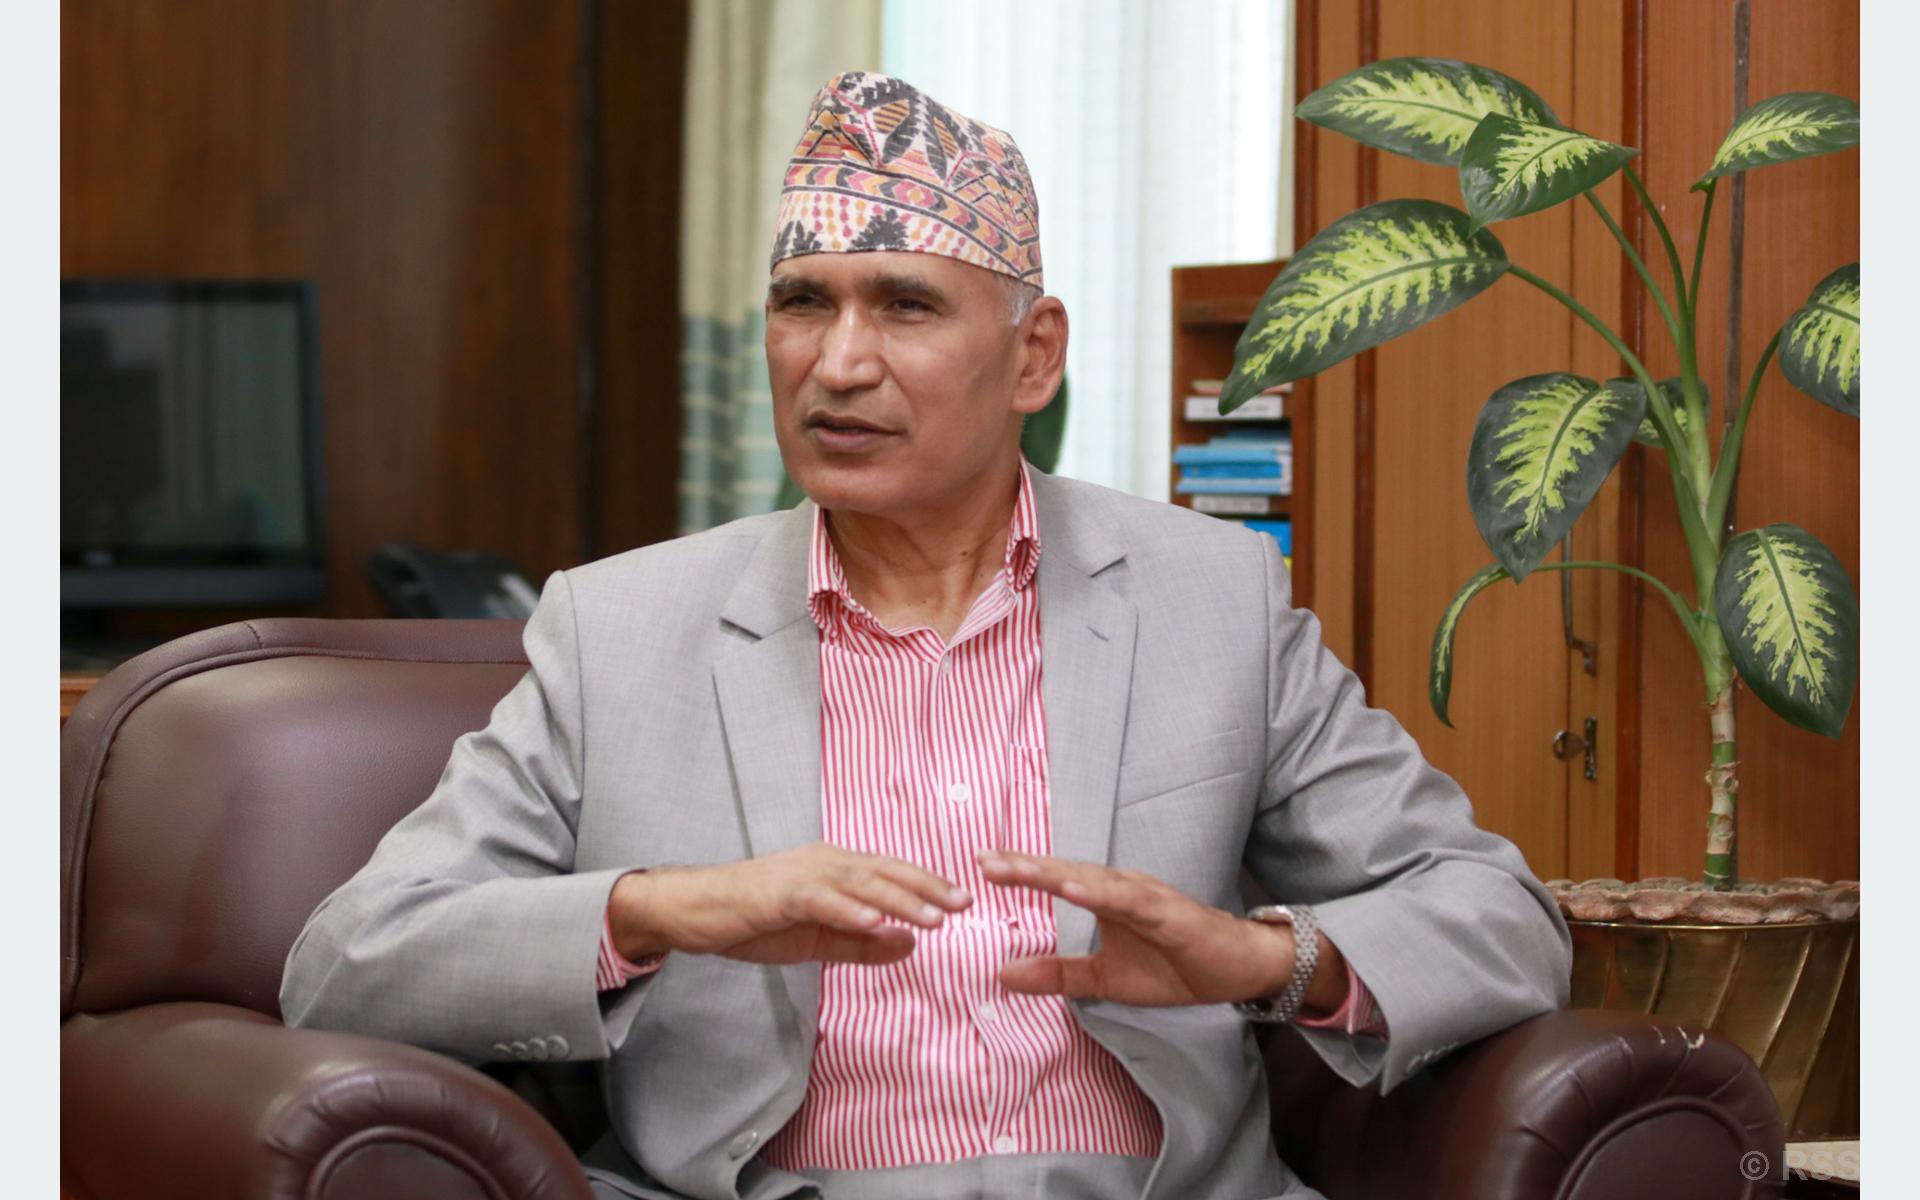 UML’s Bishnu Poudel likely to become Deputy PM and Finance Minister